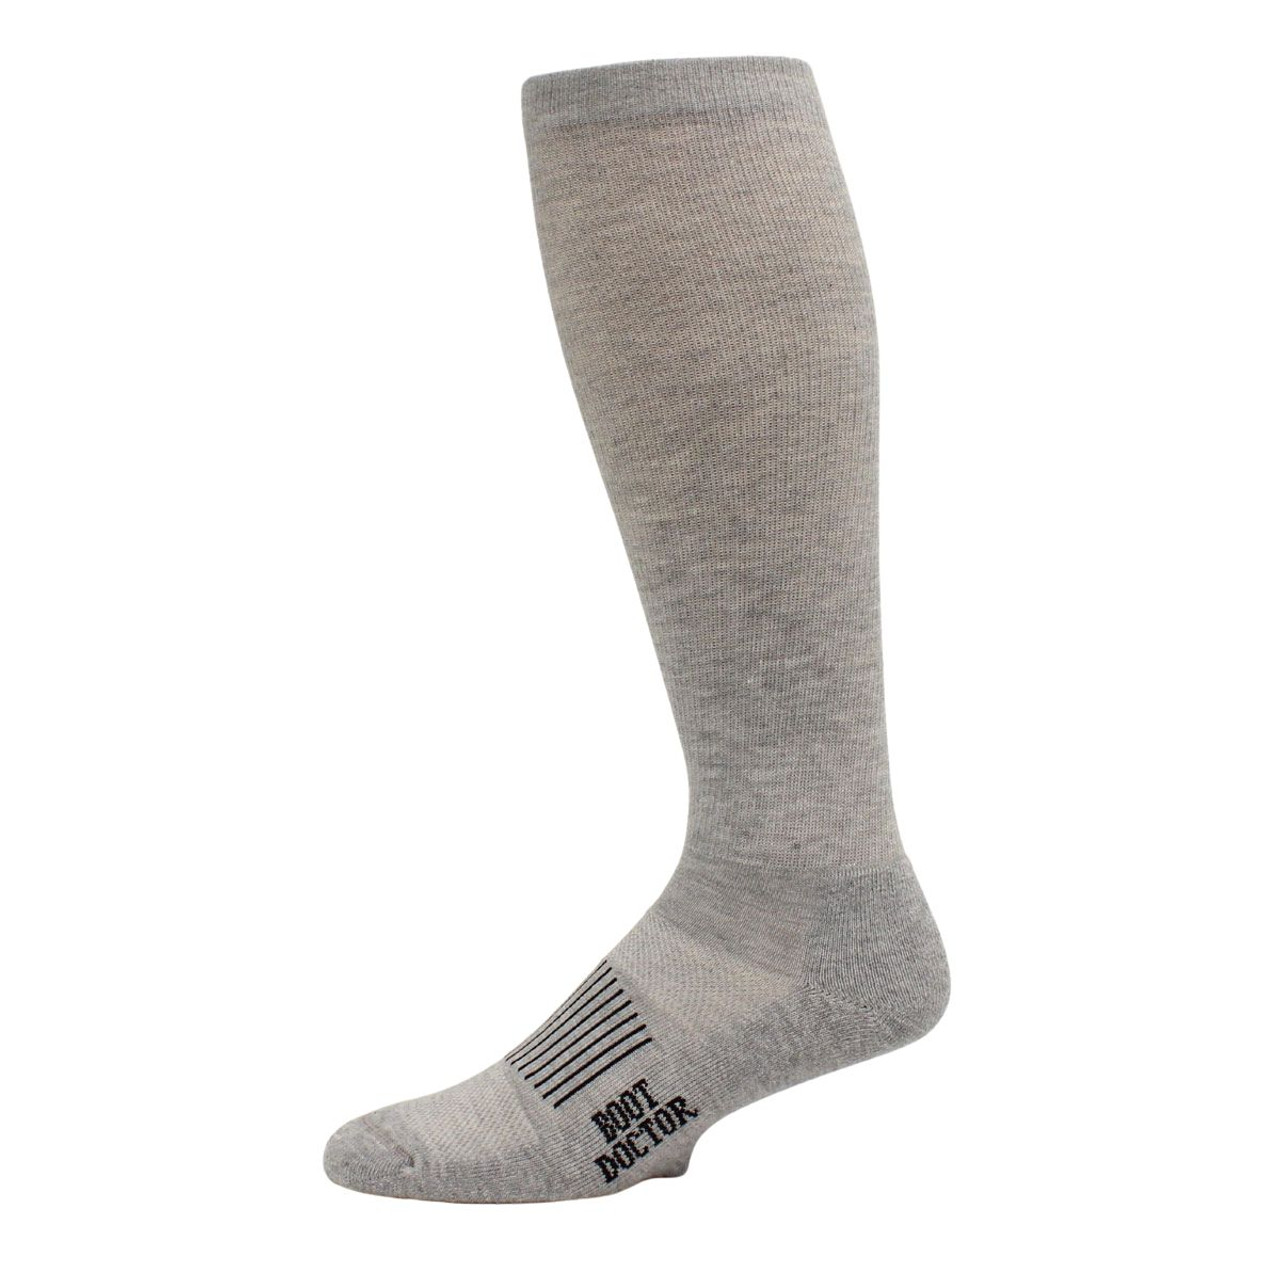 Boot Doctor Men's Grey Over The Calf Cushioned Socks - 2 Pack ...